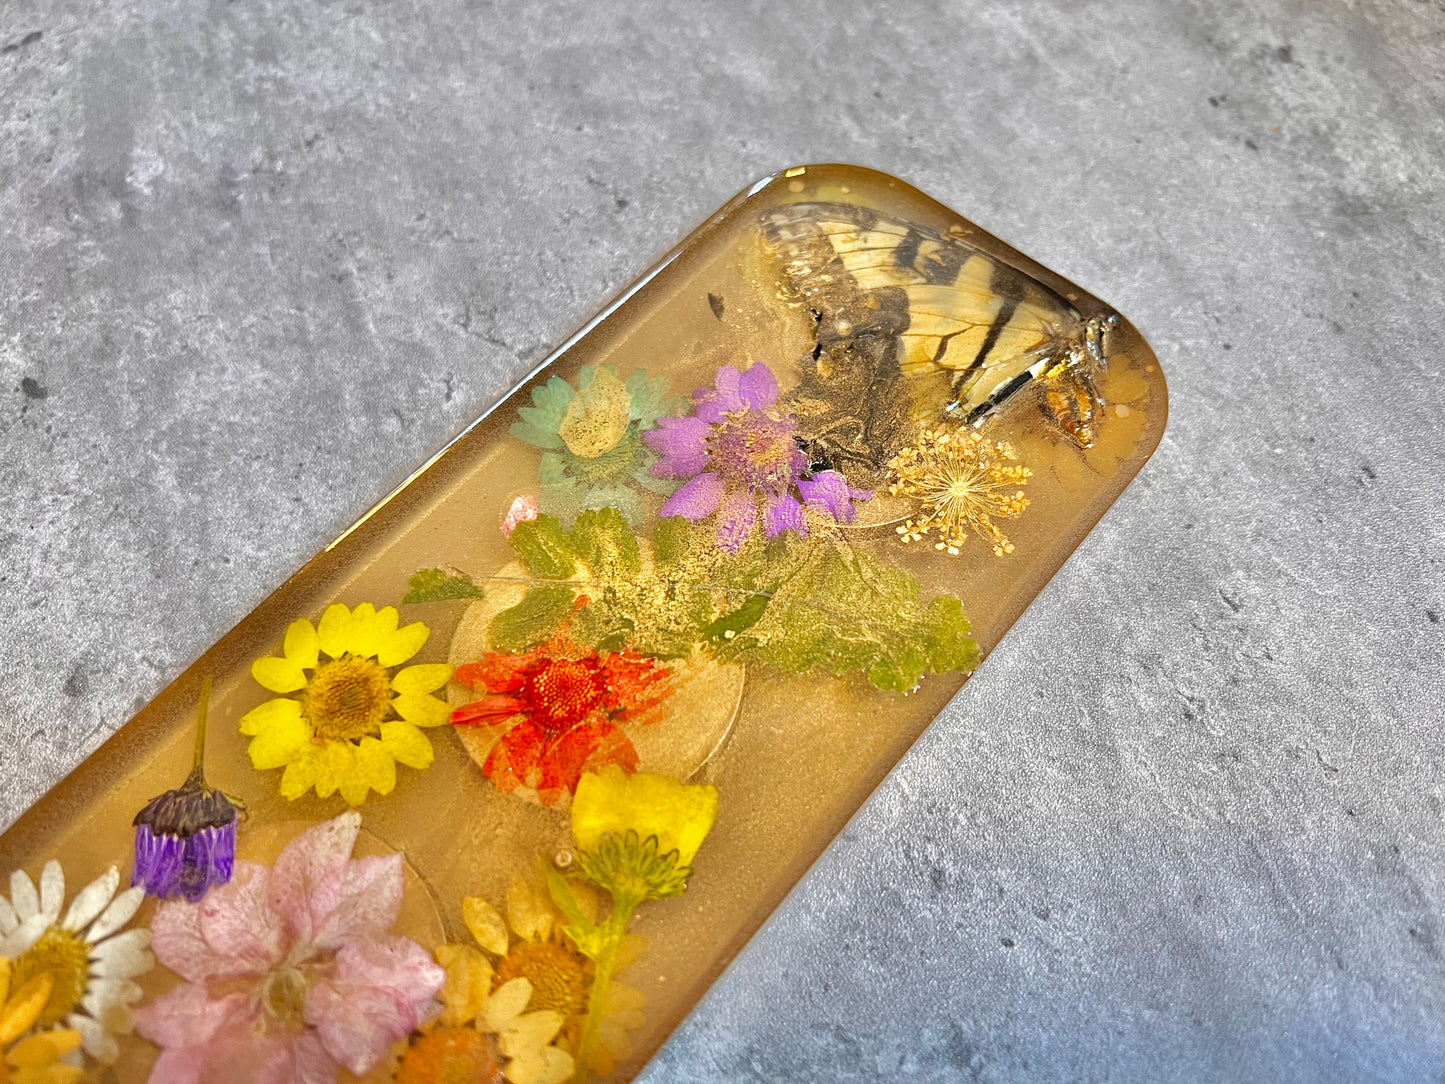 Antique Gold Shot Glass Resin Tray